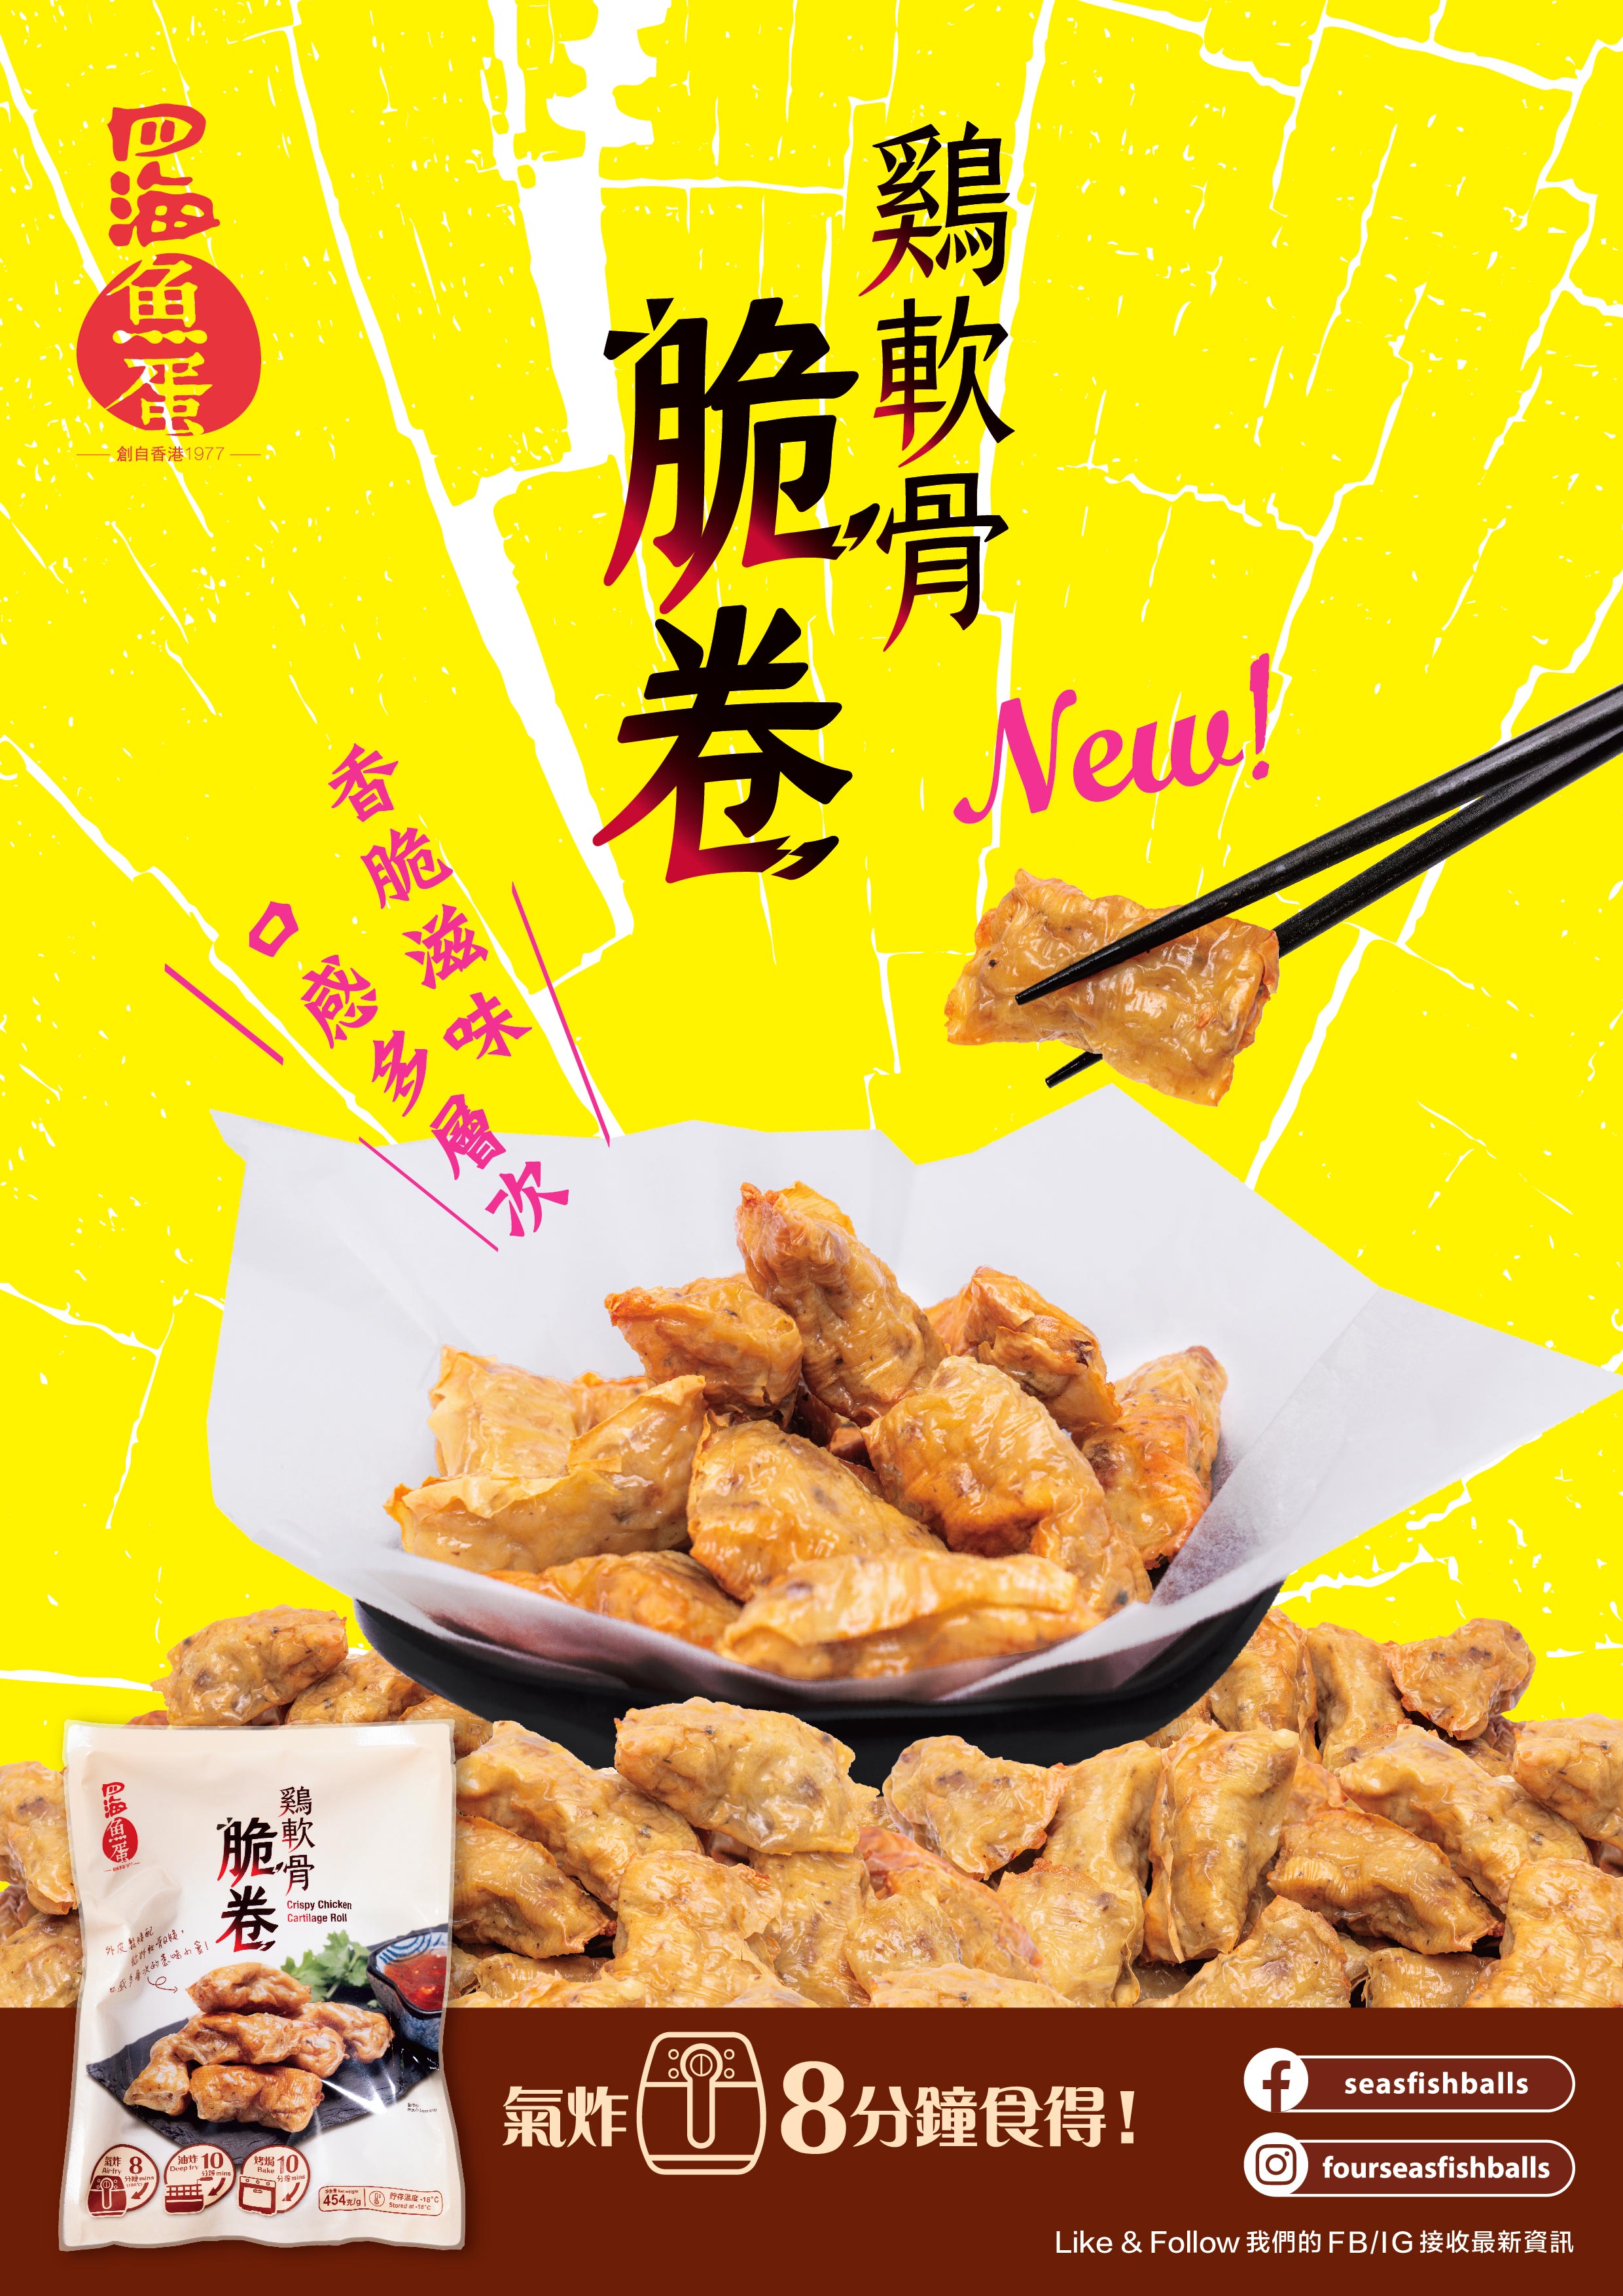 New Arrival: Crispy Chicken Cartilage Roll